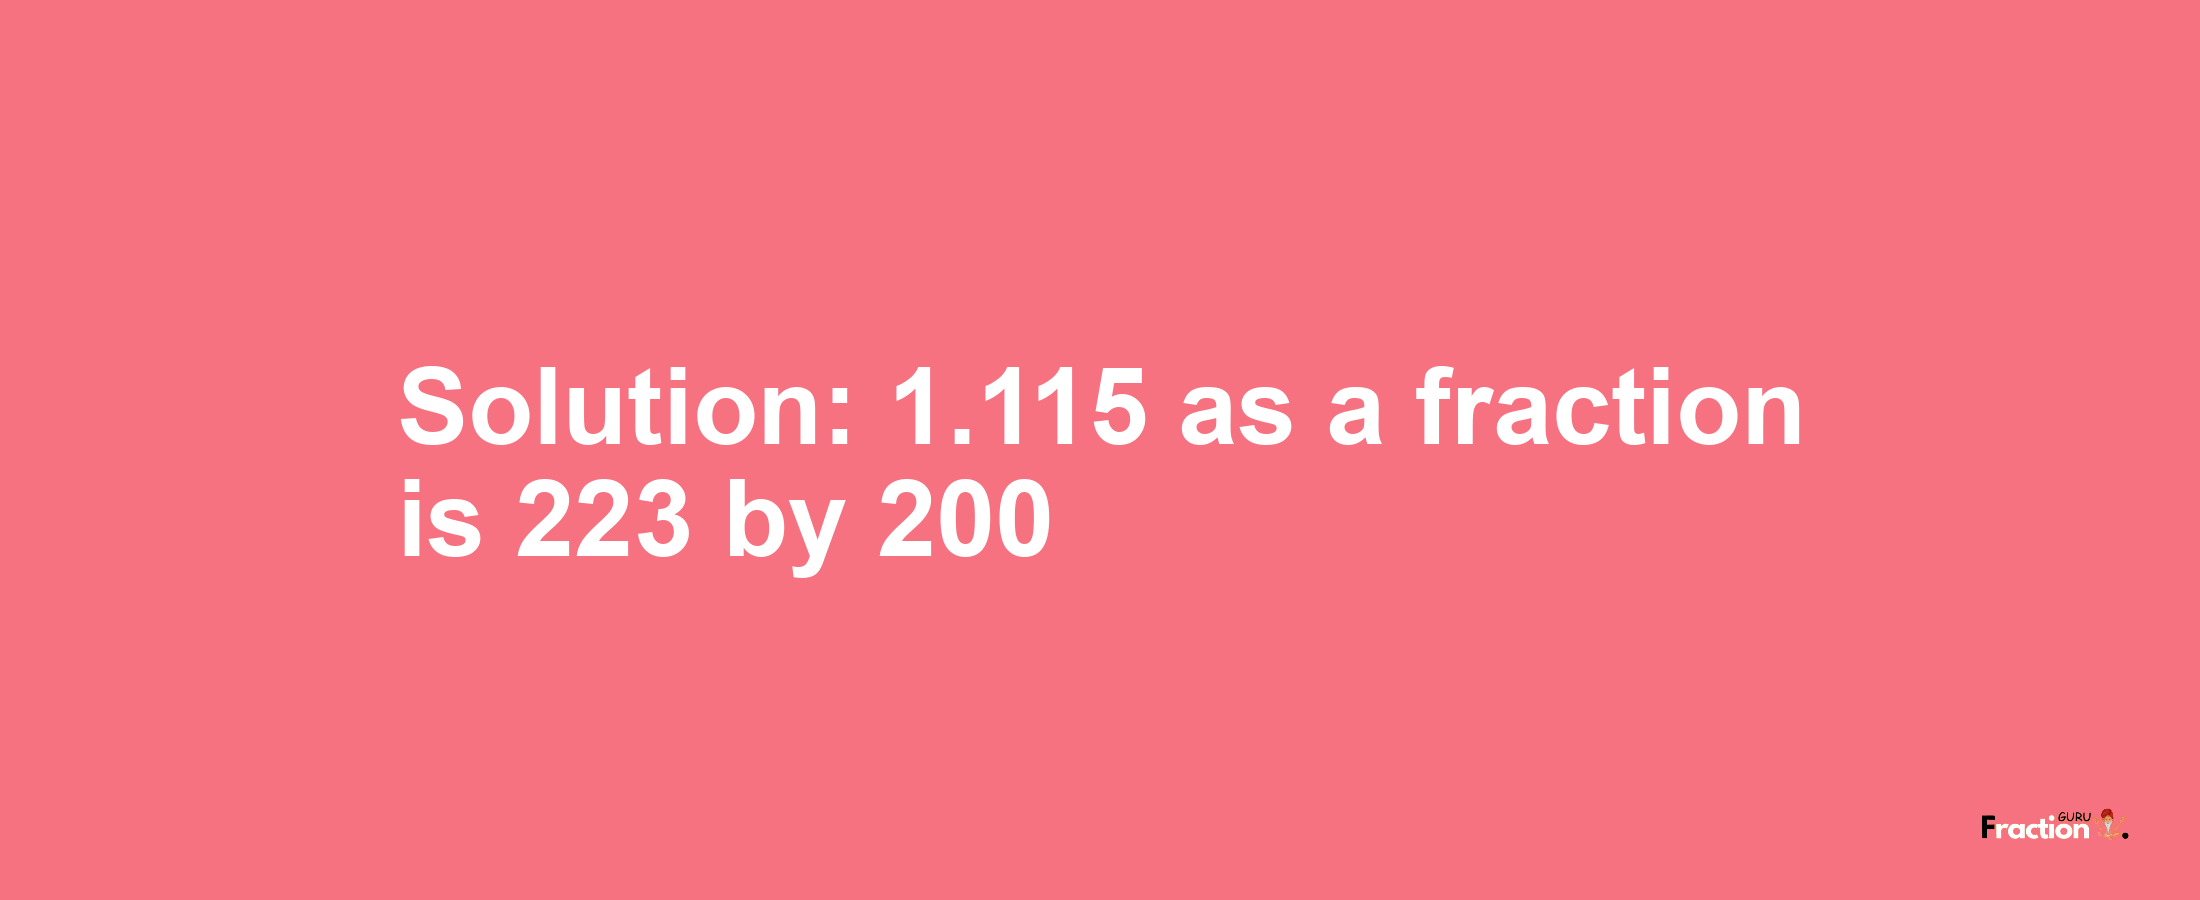 Solution:1.115 as a fraction is 223/200